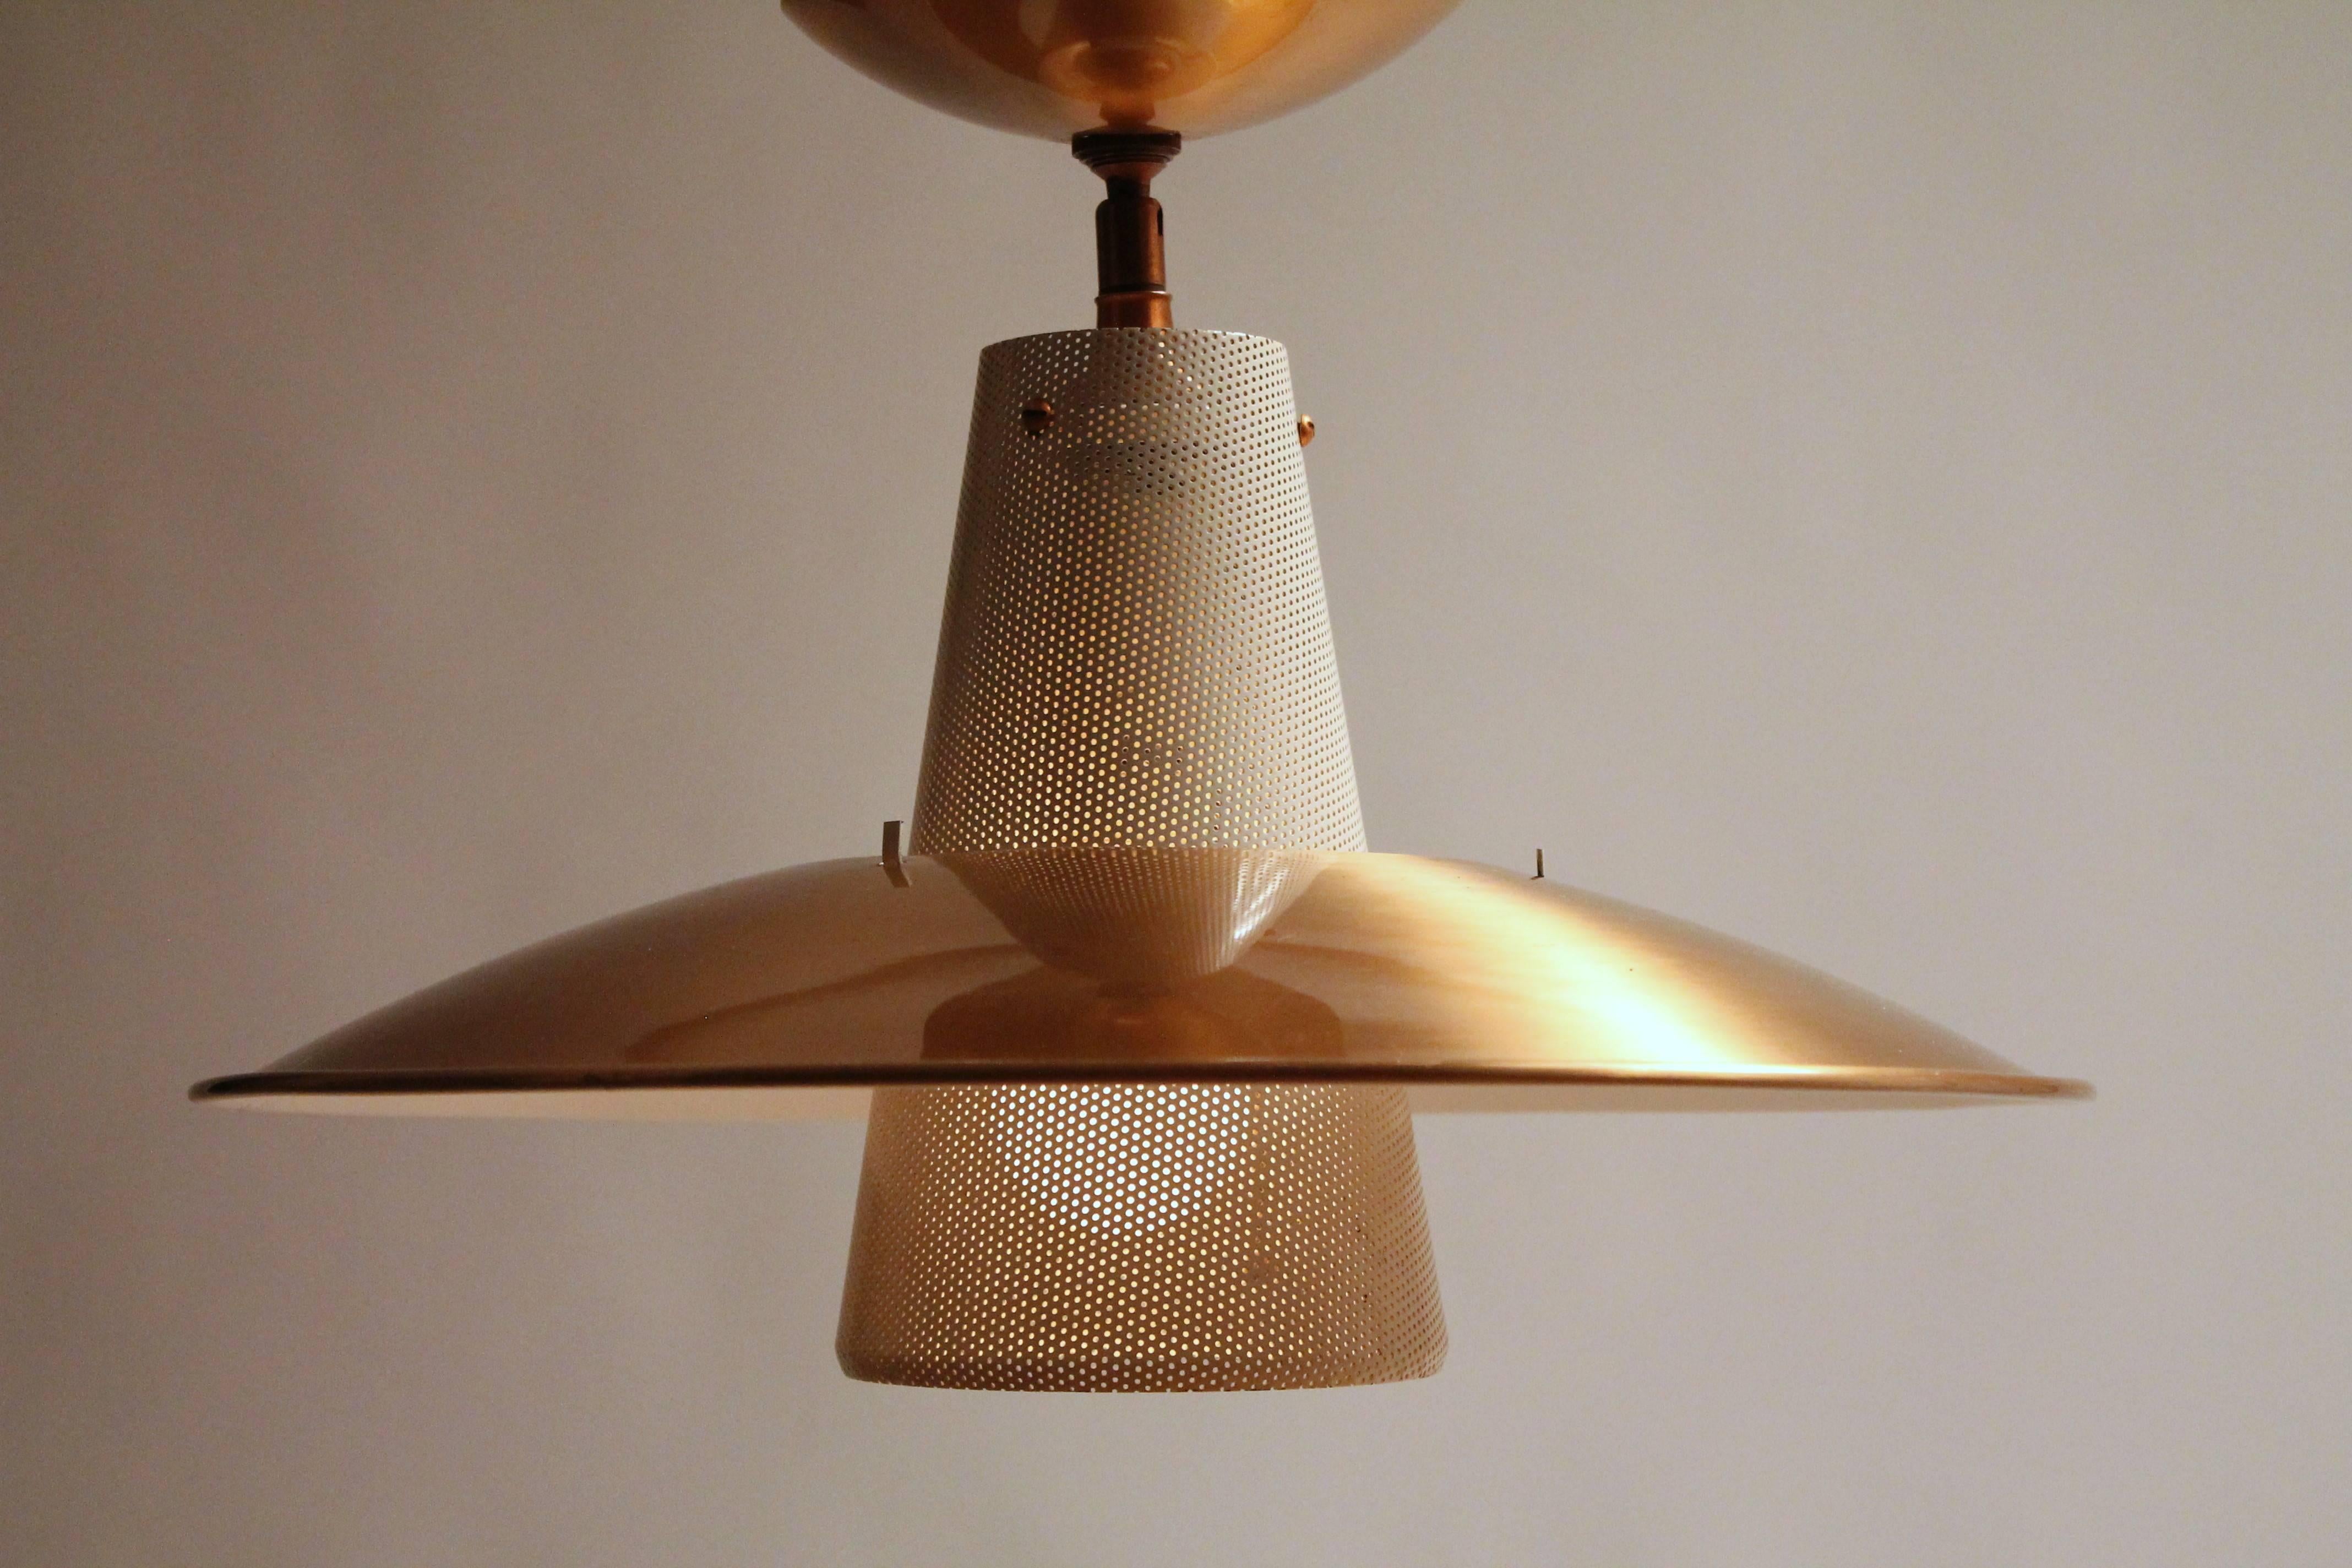 Simple Minimalist modern line , copper plated aluminium shade and hardware, perforated enameled steel funnel to damper harsh light.

Measure 17 inches wide by 12.5 inches high from canopy to bottom of lamp . 

  